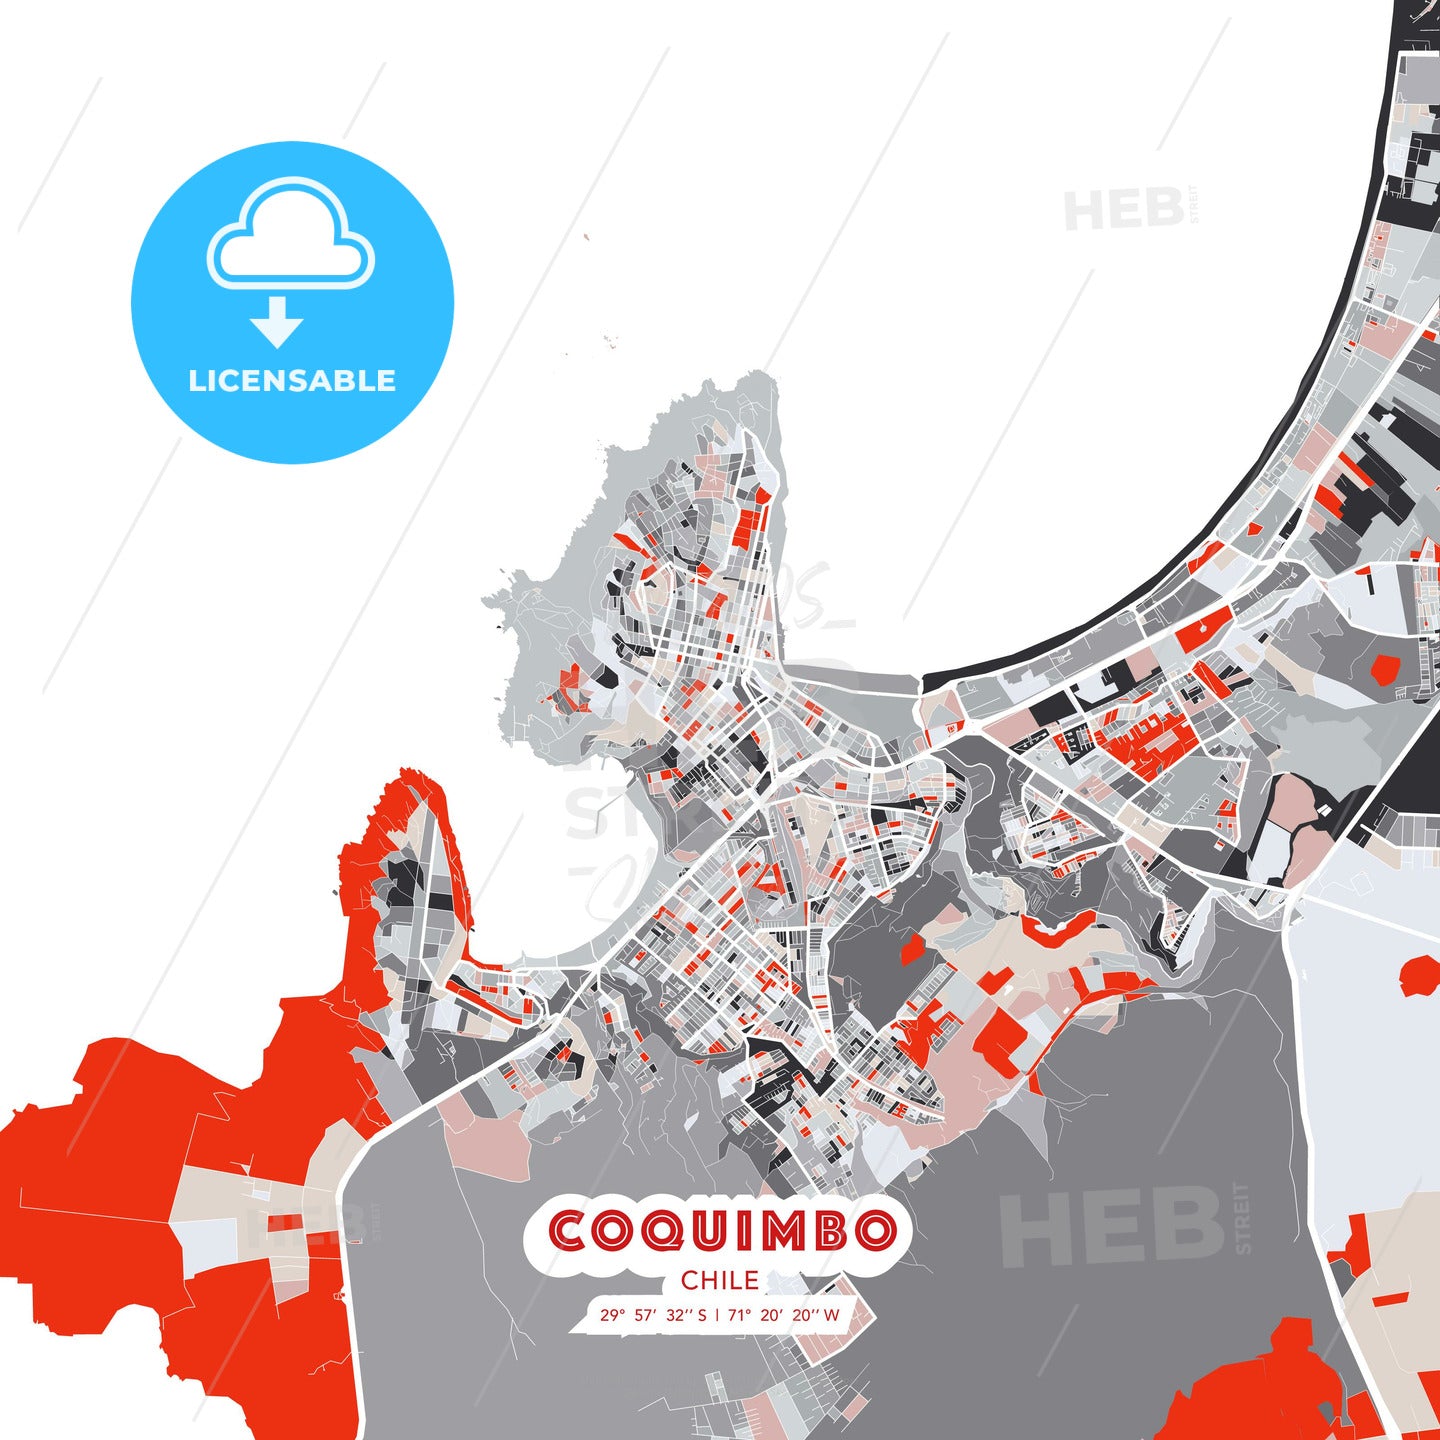 Coquimbo, Chile, modern map - HEBSTREITS Sketches